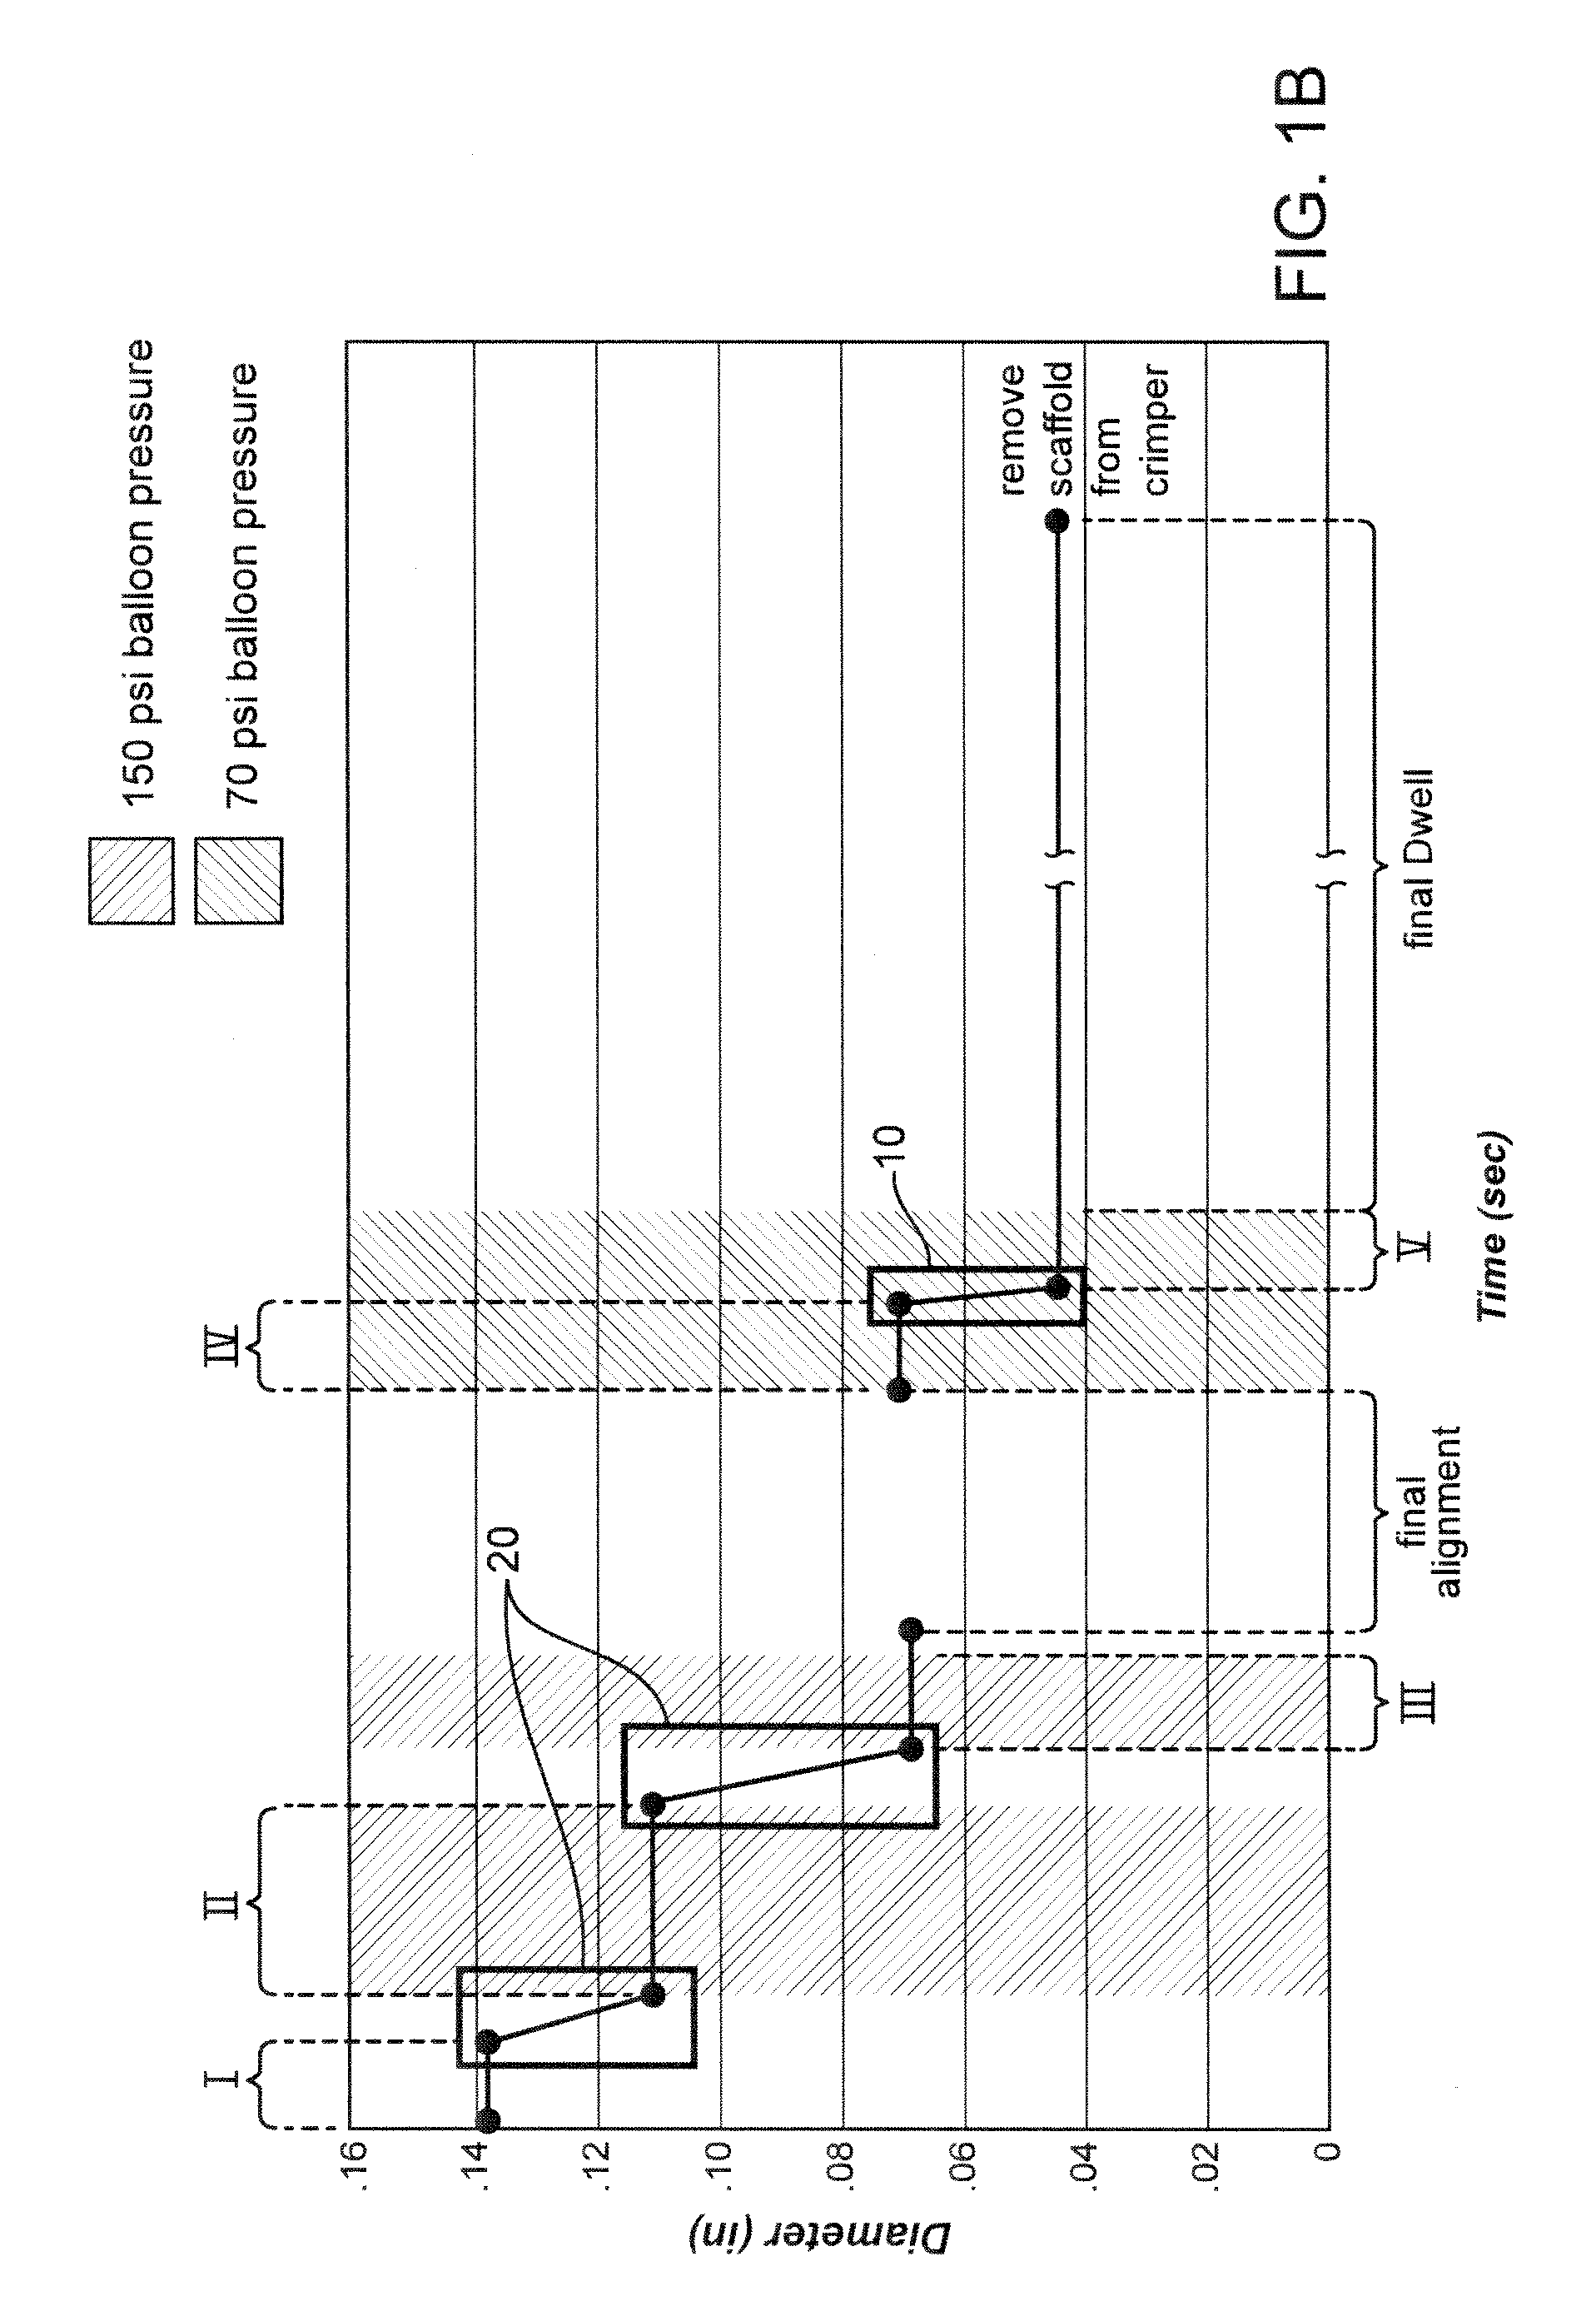 Methods for Increasing a Retention Force Between a Polymeric Scaffold and a Delivery Balloon